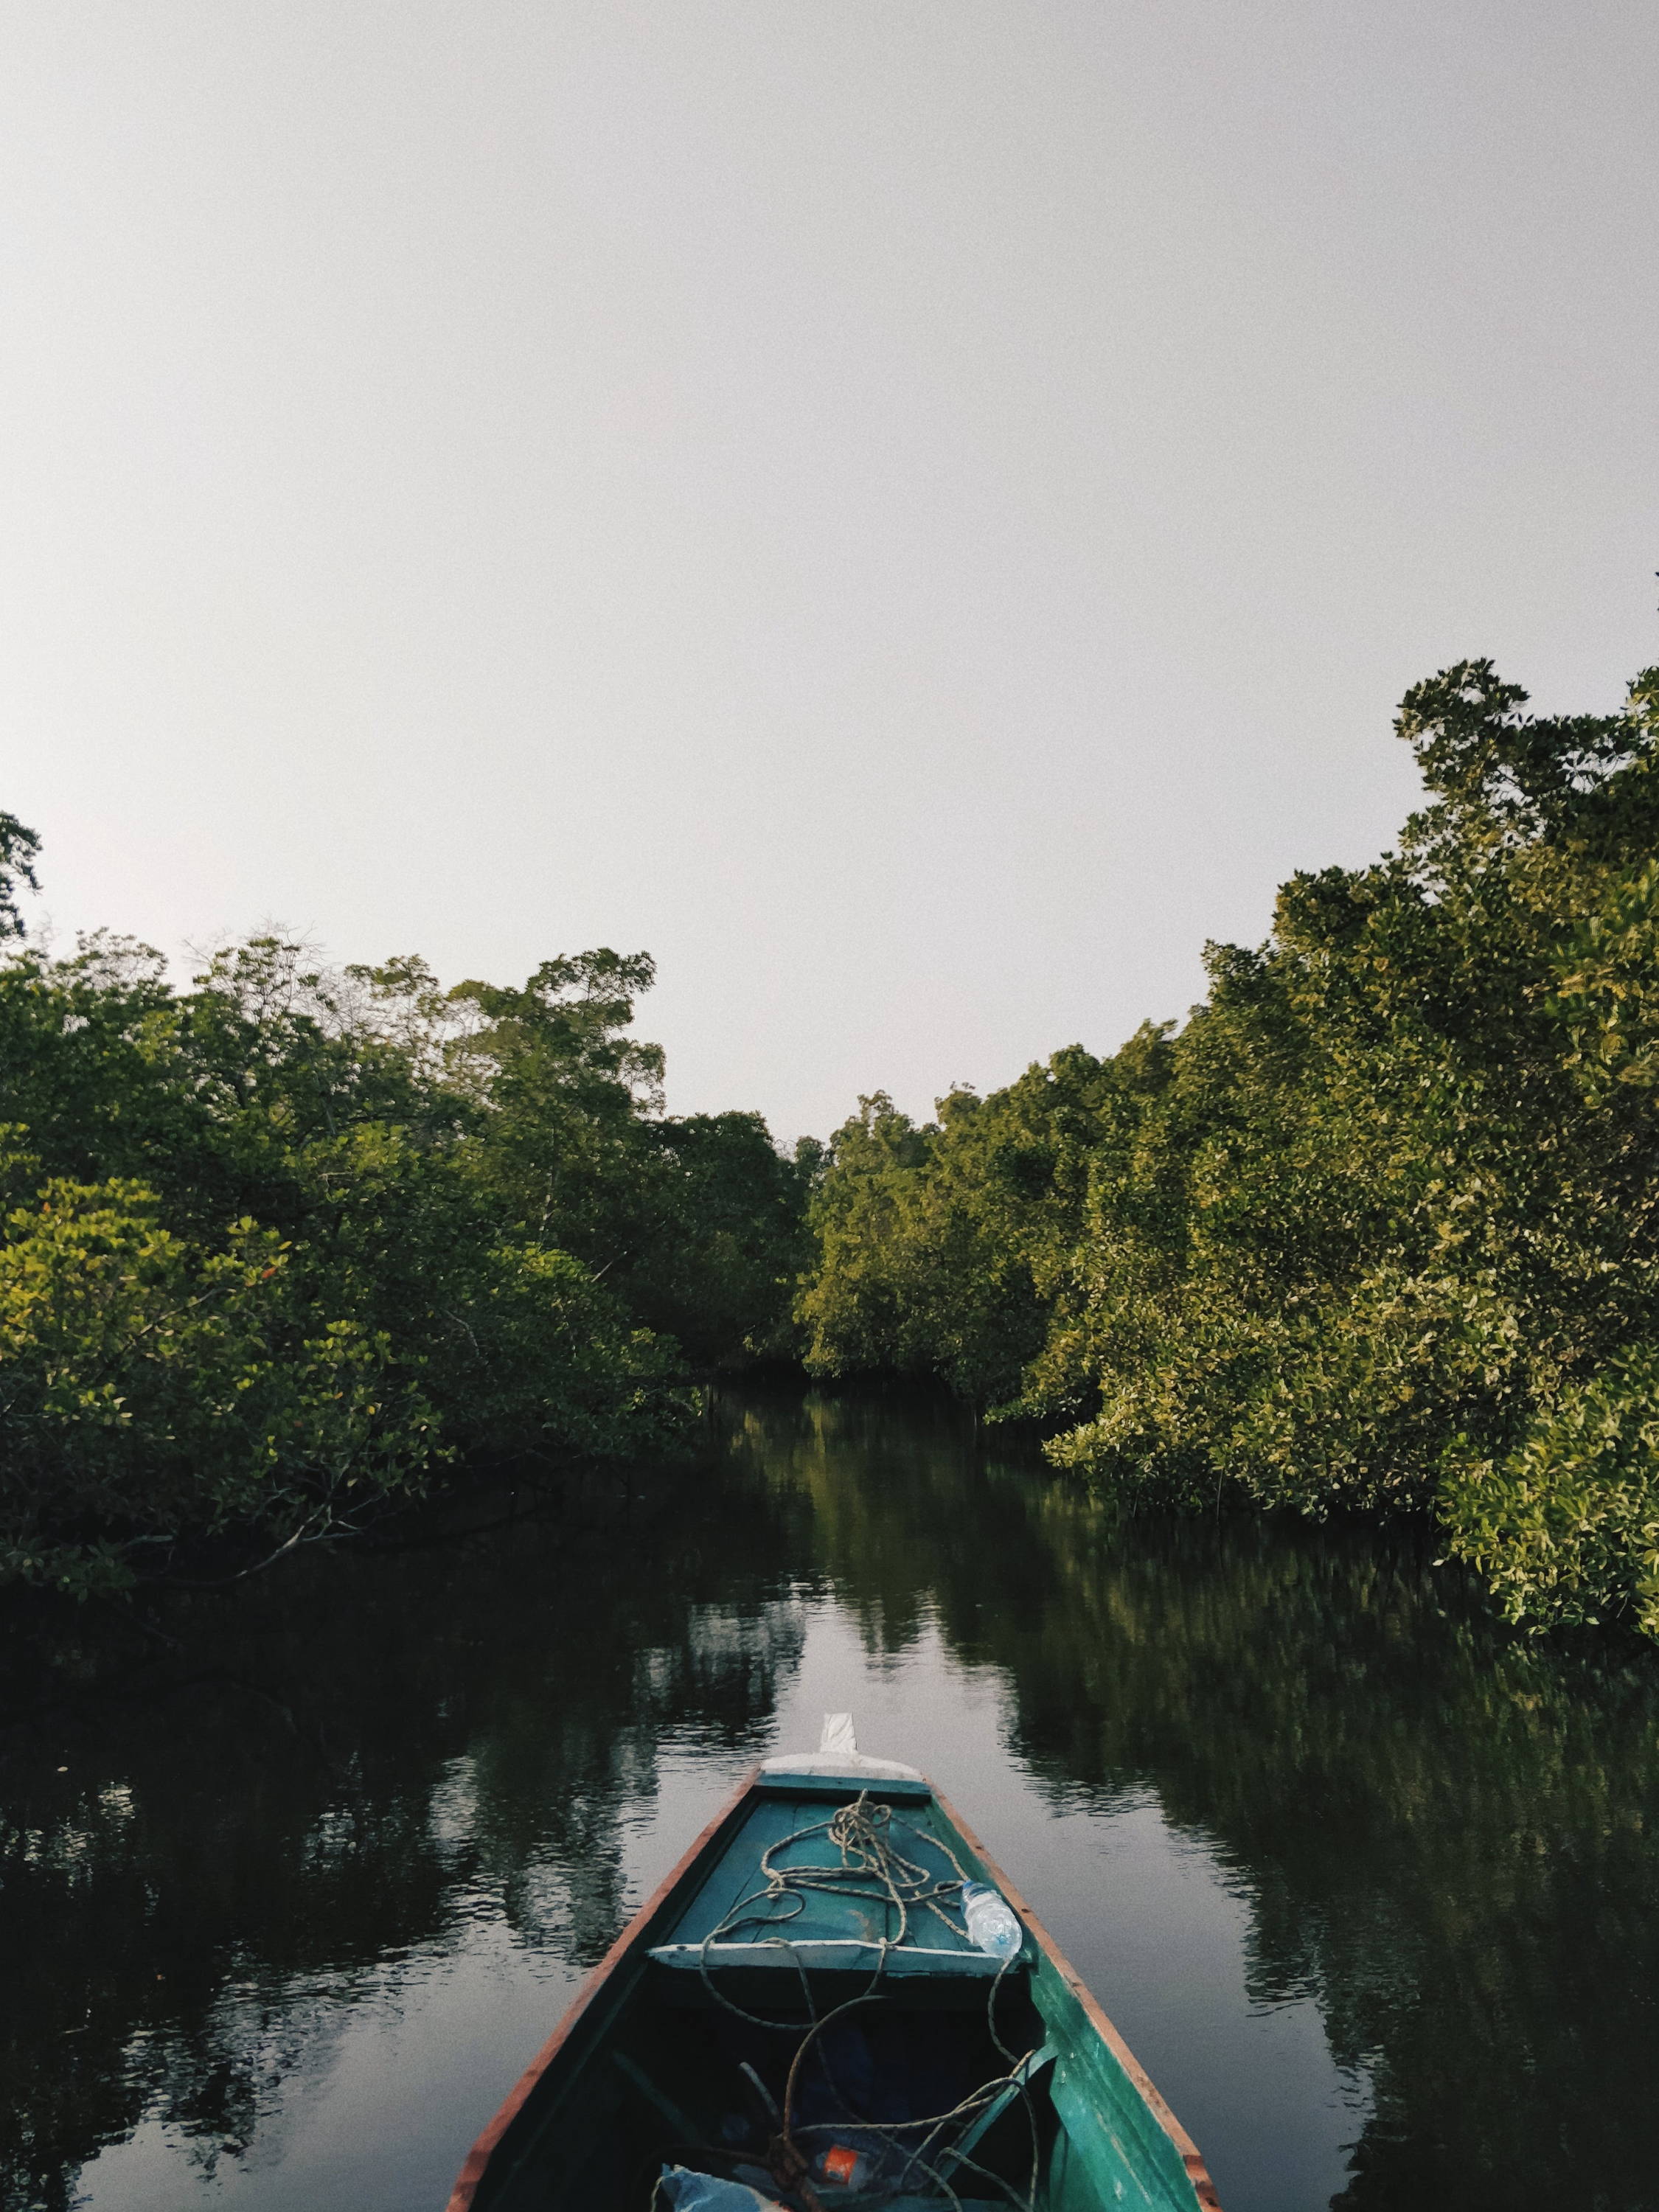 Learn about the importance of conserving mangrove ecosystems with The Forest Conservation's Charlotte Opal.